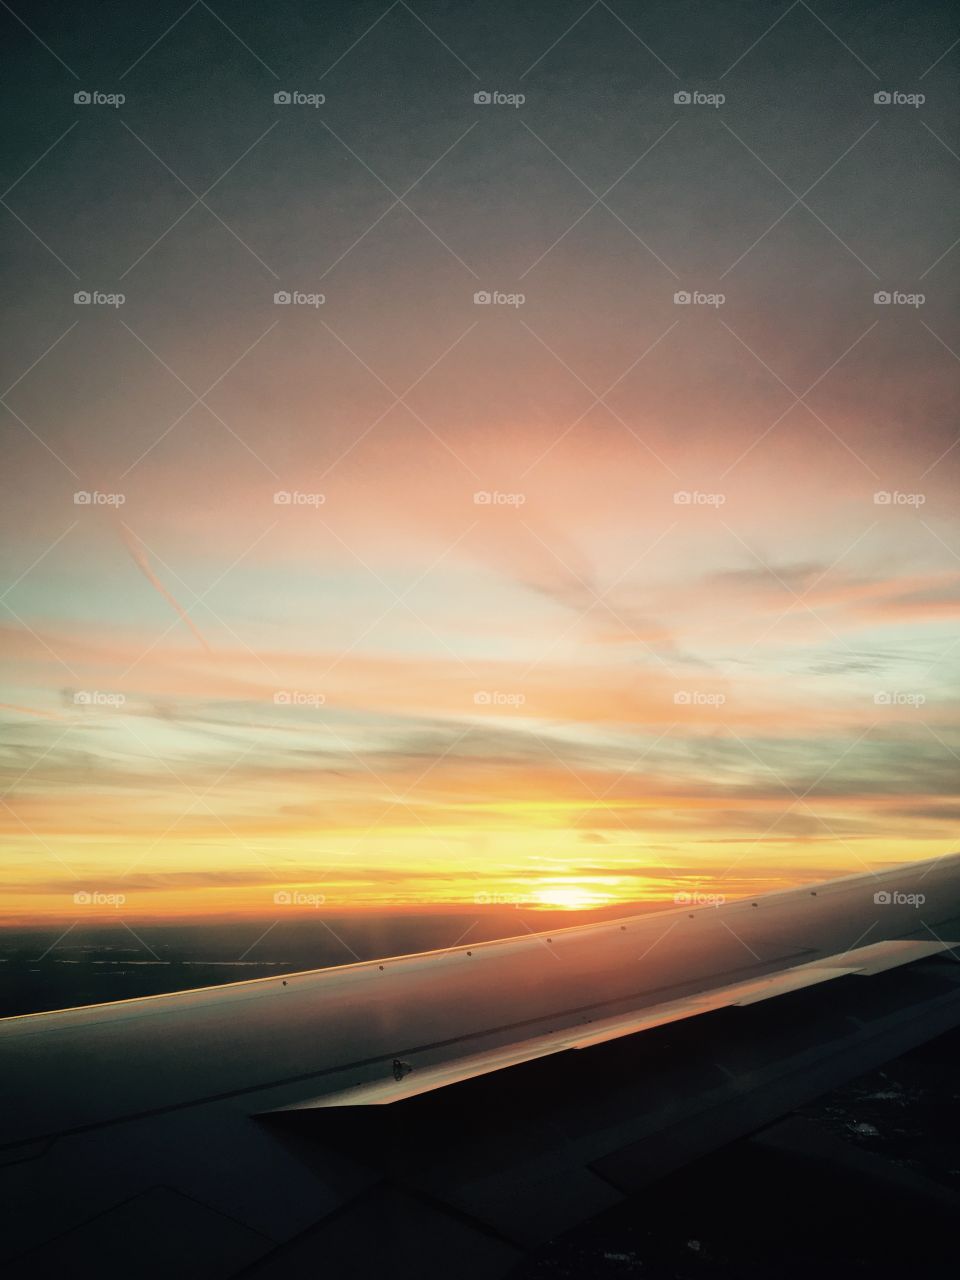 Sunset up in the air